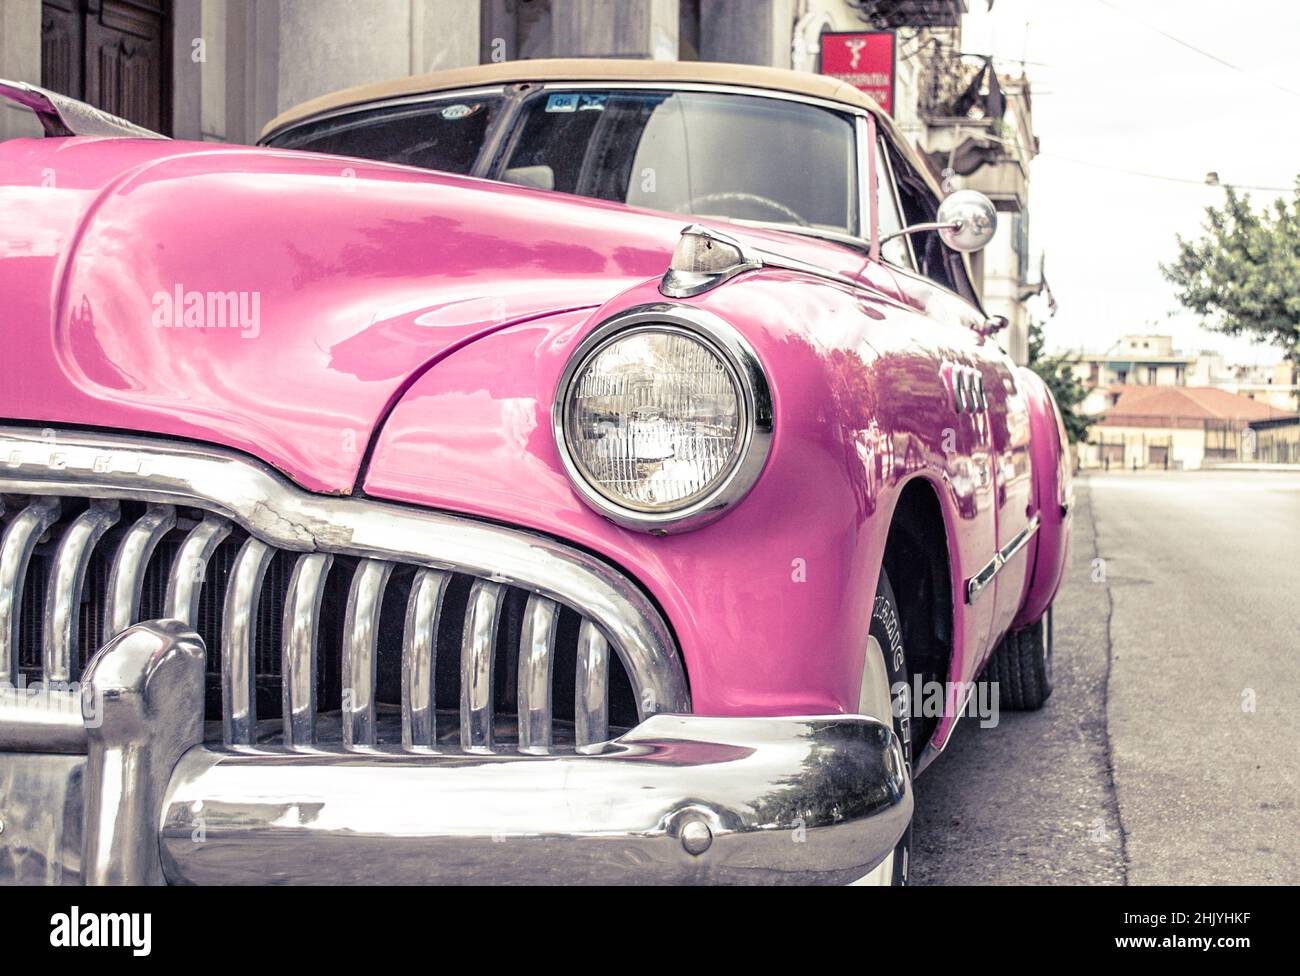 Pink Vintage Antique Car. Buick Super Convertible Sedan Parked Aside the Road in an Old Neighborhood of Patras, Greece Stock Photo